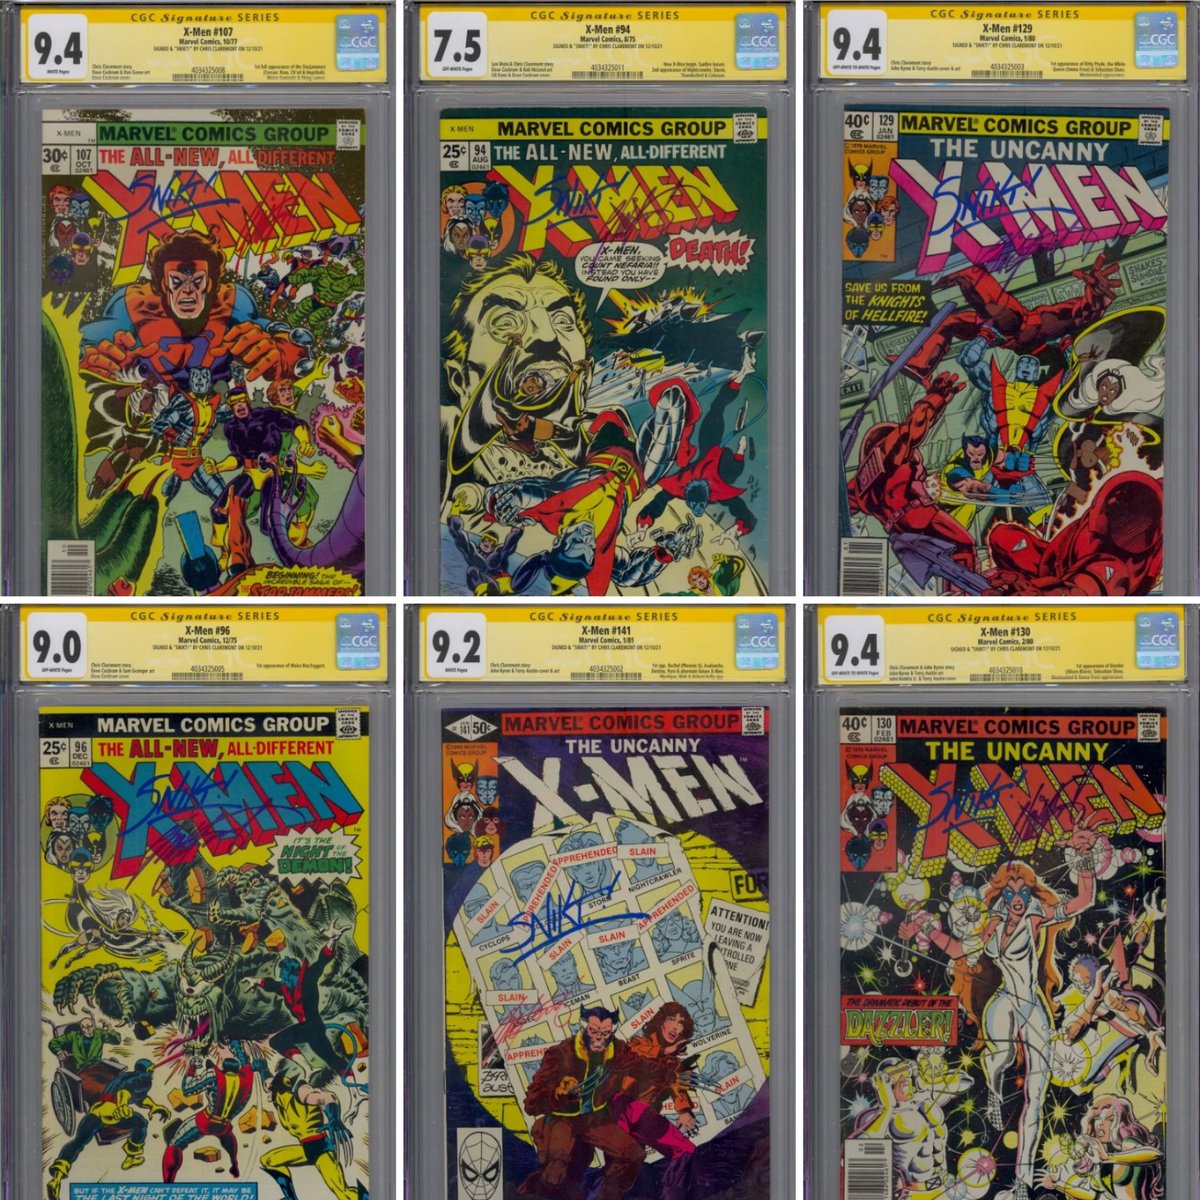 We have a batch of signed and graded Chris Claremont books up in our online shops. 

#comics #comicbooks #cgccomics #cgc #xmen #uncannyxmen #chrisclaremont #signatureseries #marvelcomics